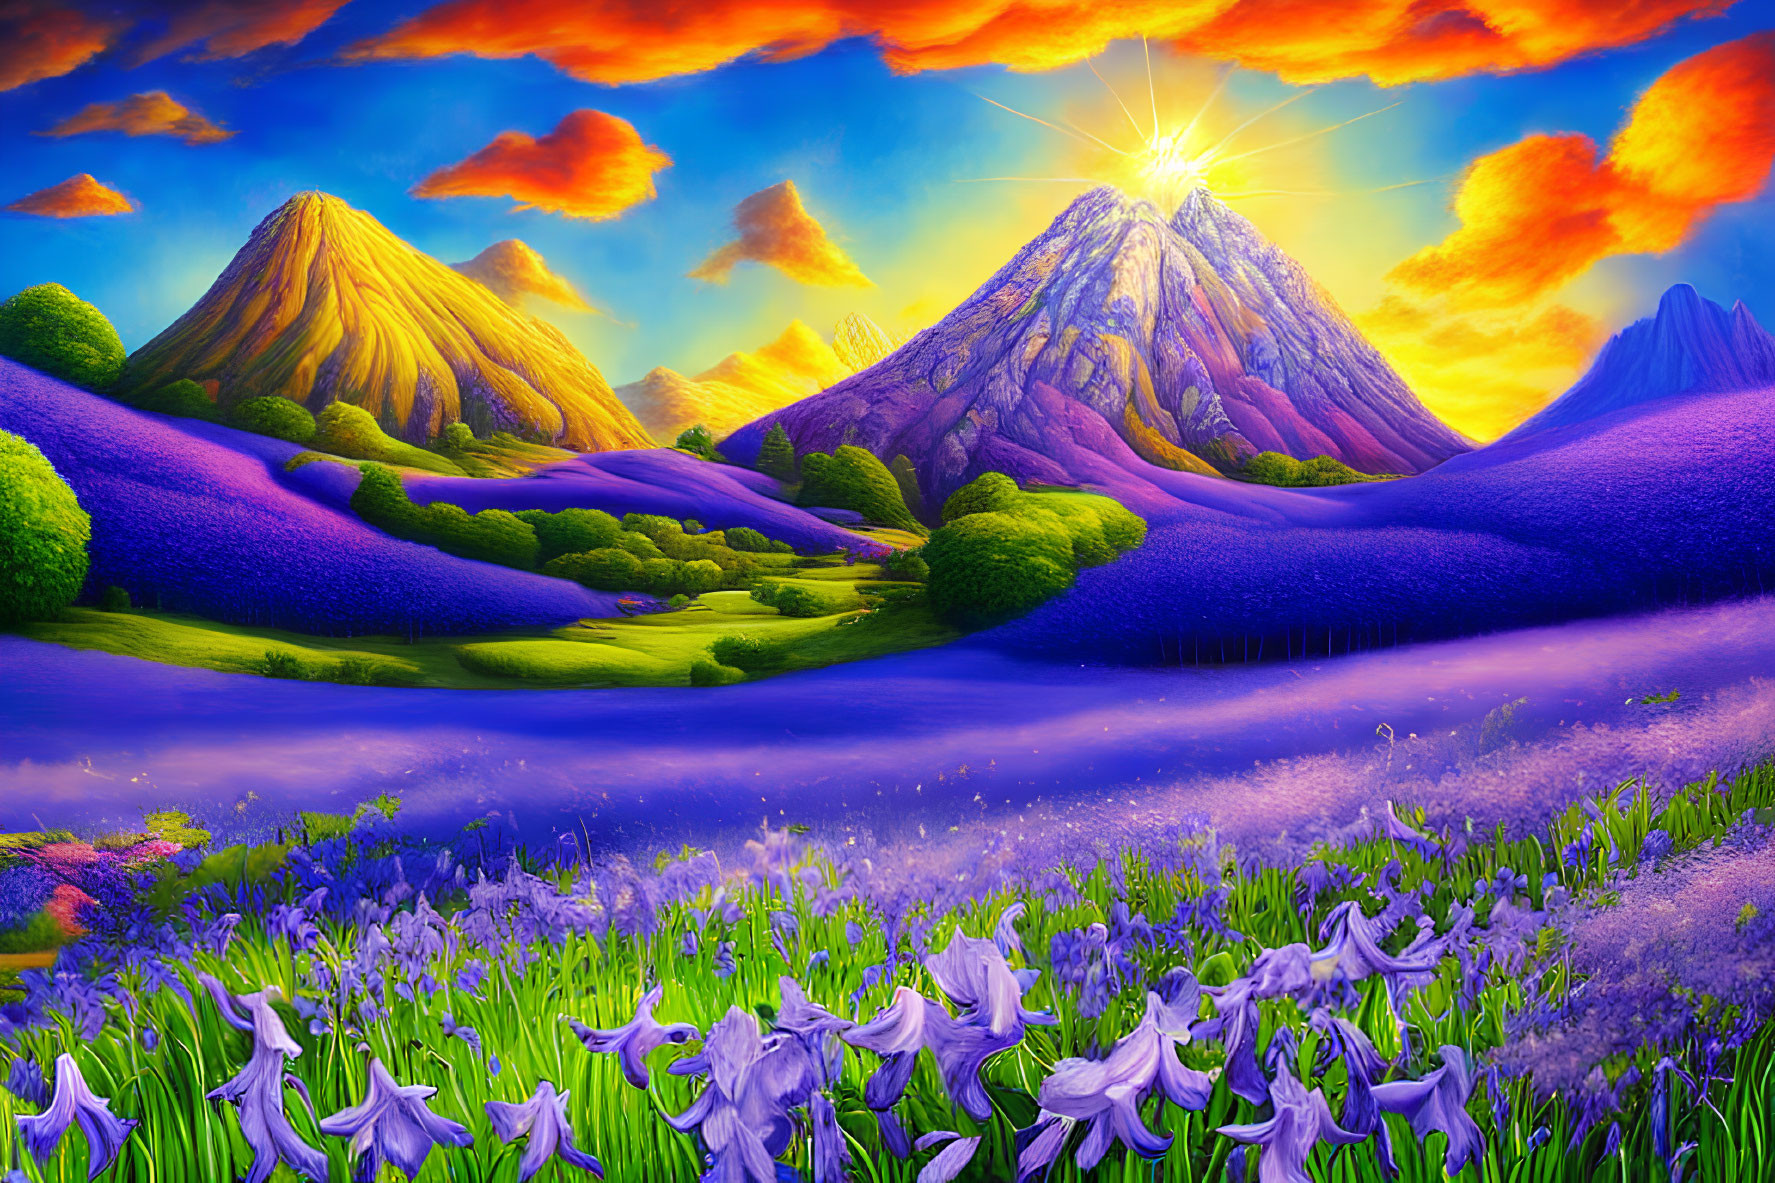 Scenic landscape with purple flowers, green valleys, and sunset mountains